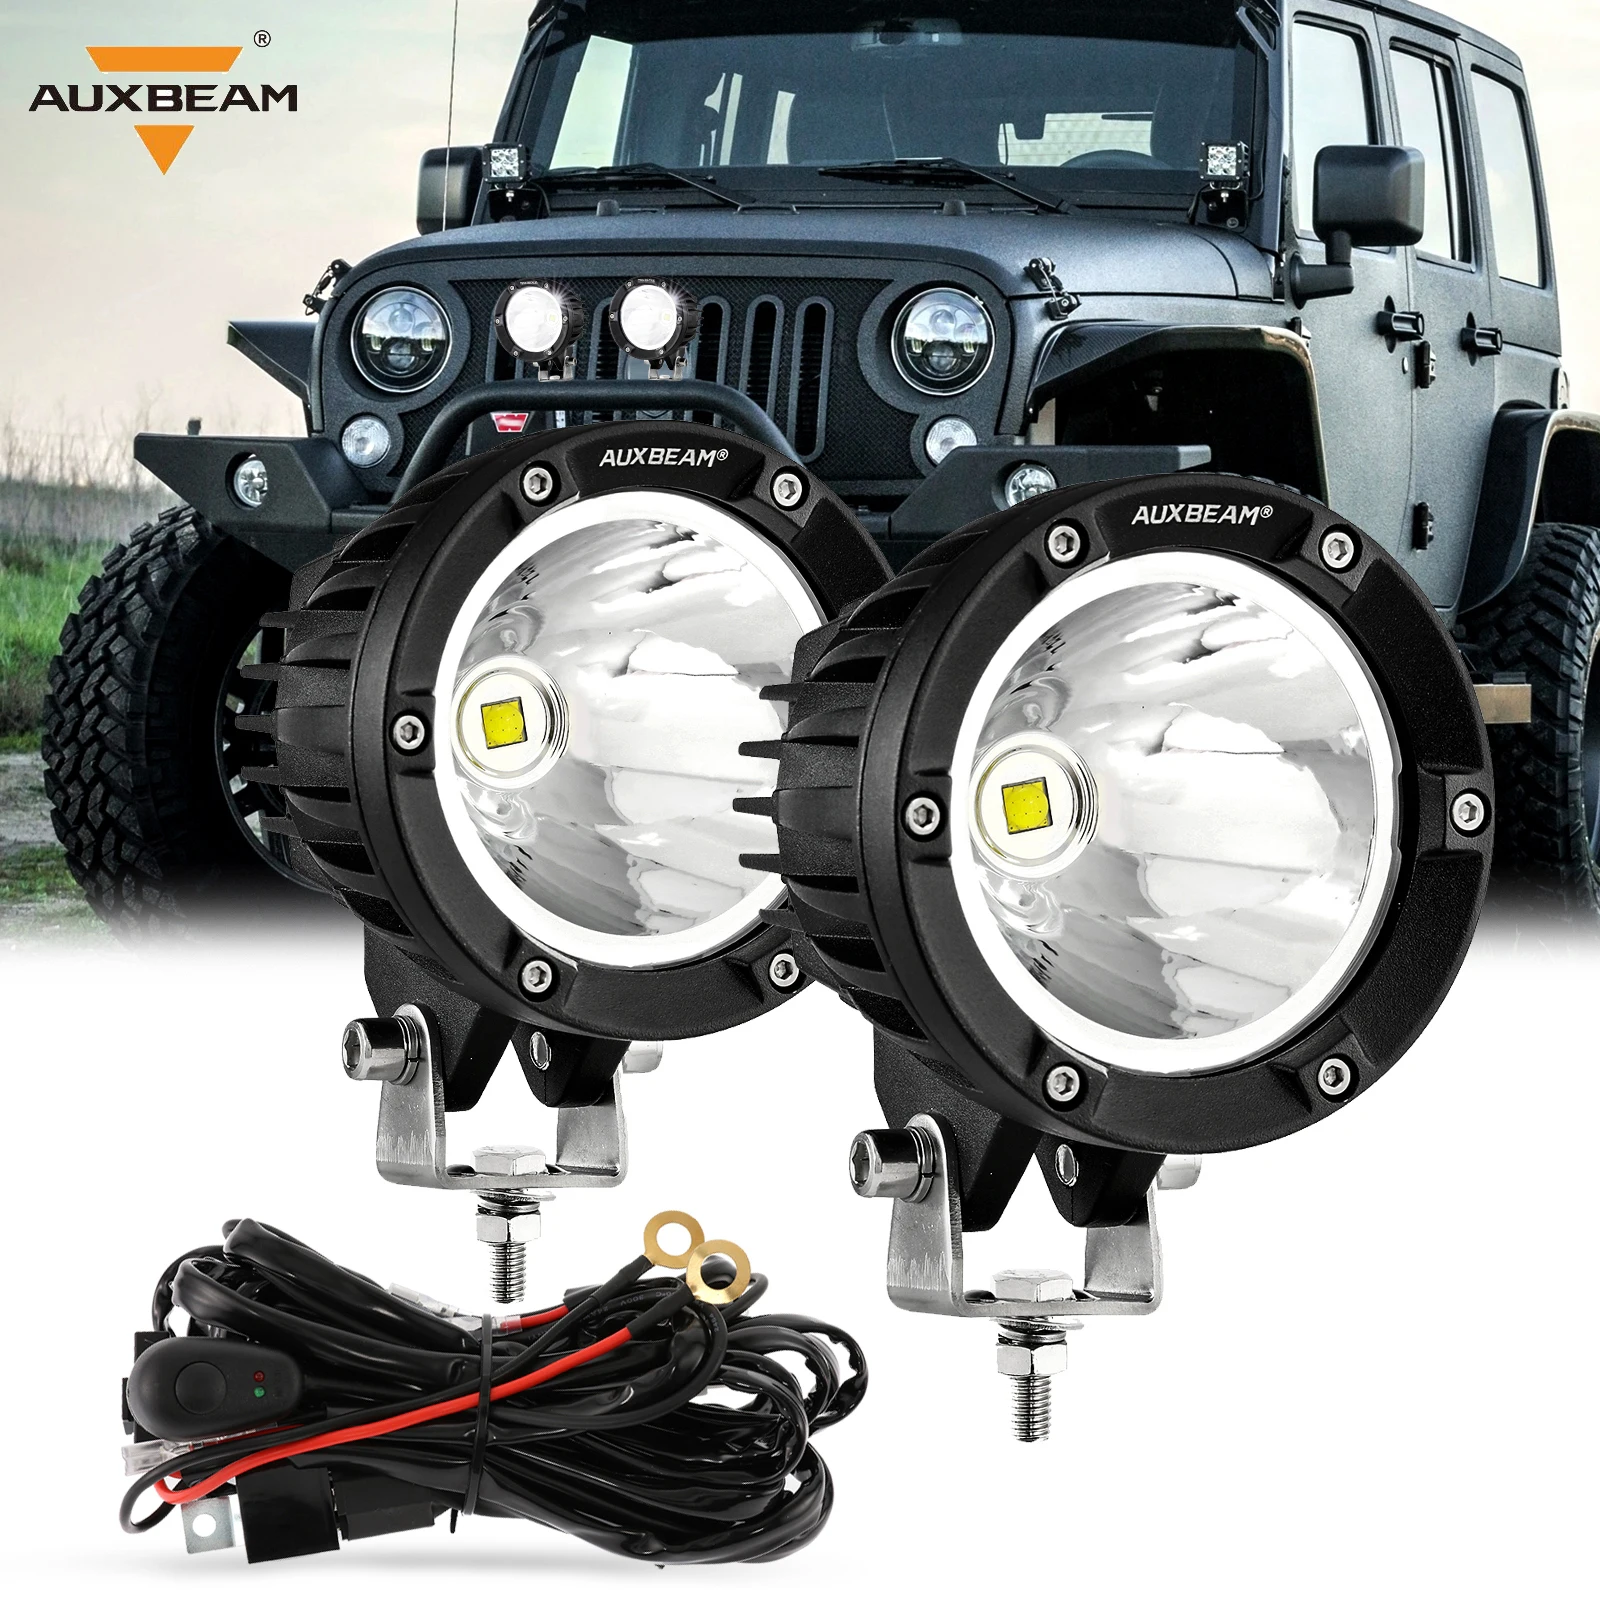 LED Combo OffRoad Driving Lights 2PCS 3Inch 40W Super Bright Waterproof Pods Work Lamps For Wrangler Offroad 4X4 Auto Car Jeep Truck ATV UTV Boat Motorcycle 